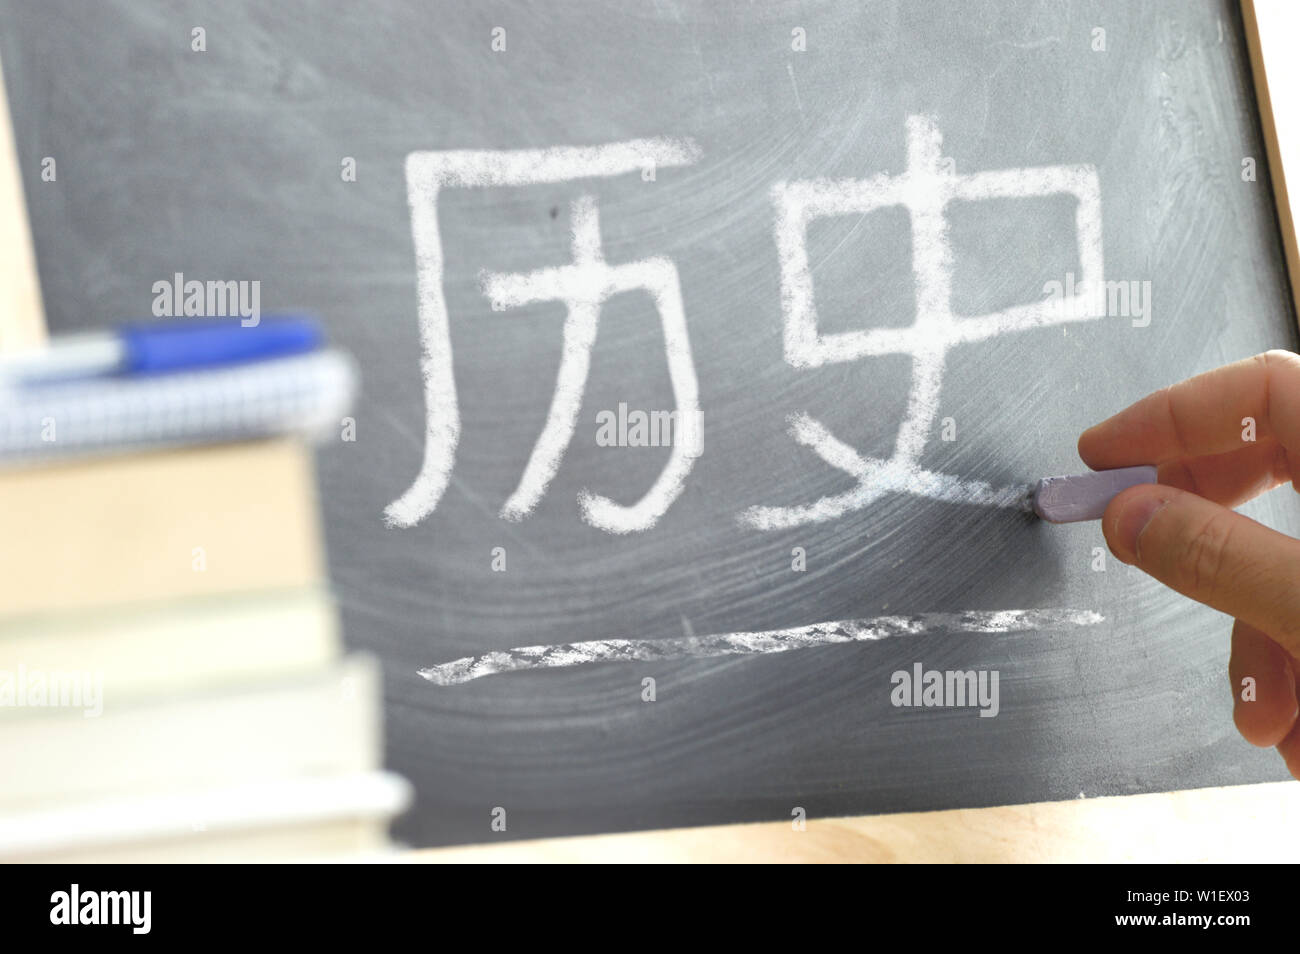 Hand writing on a blackboard in Chinese History class with the word History written on. Some books and school materials. Stock Photo